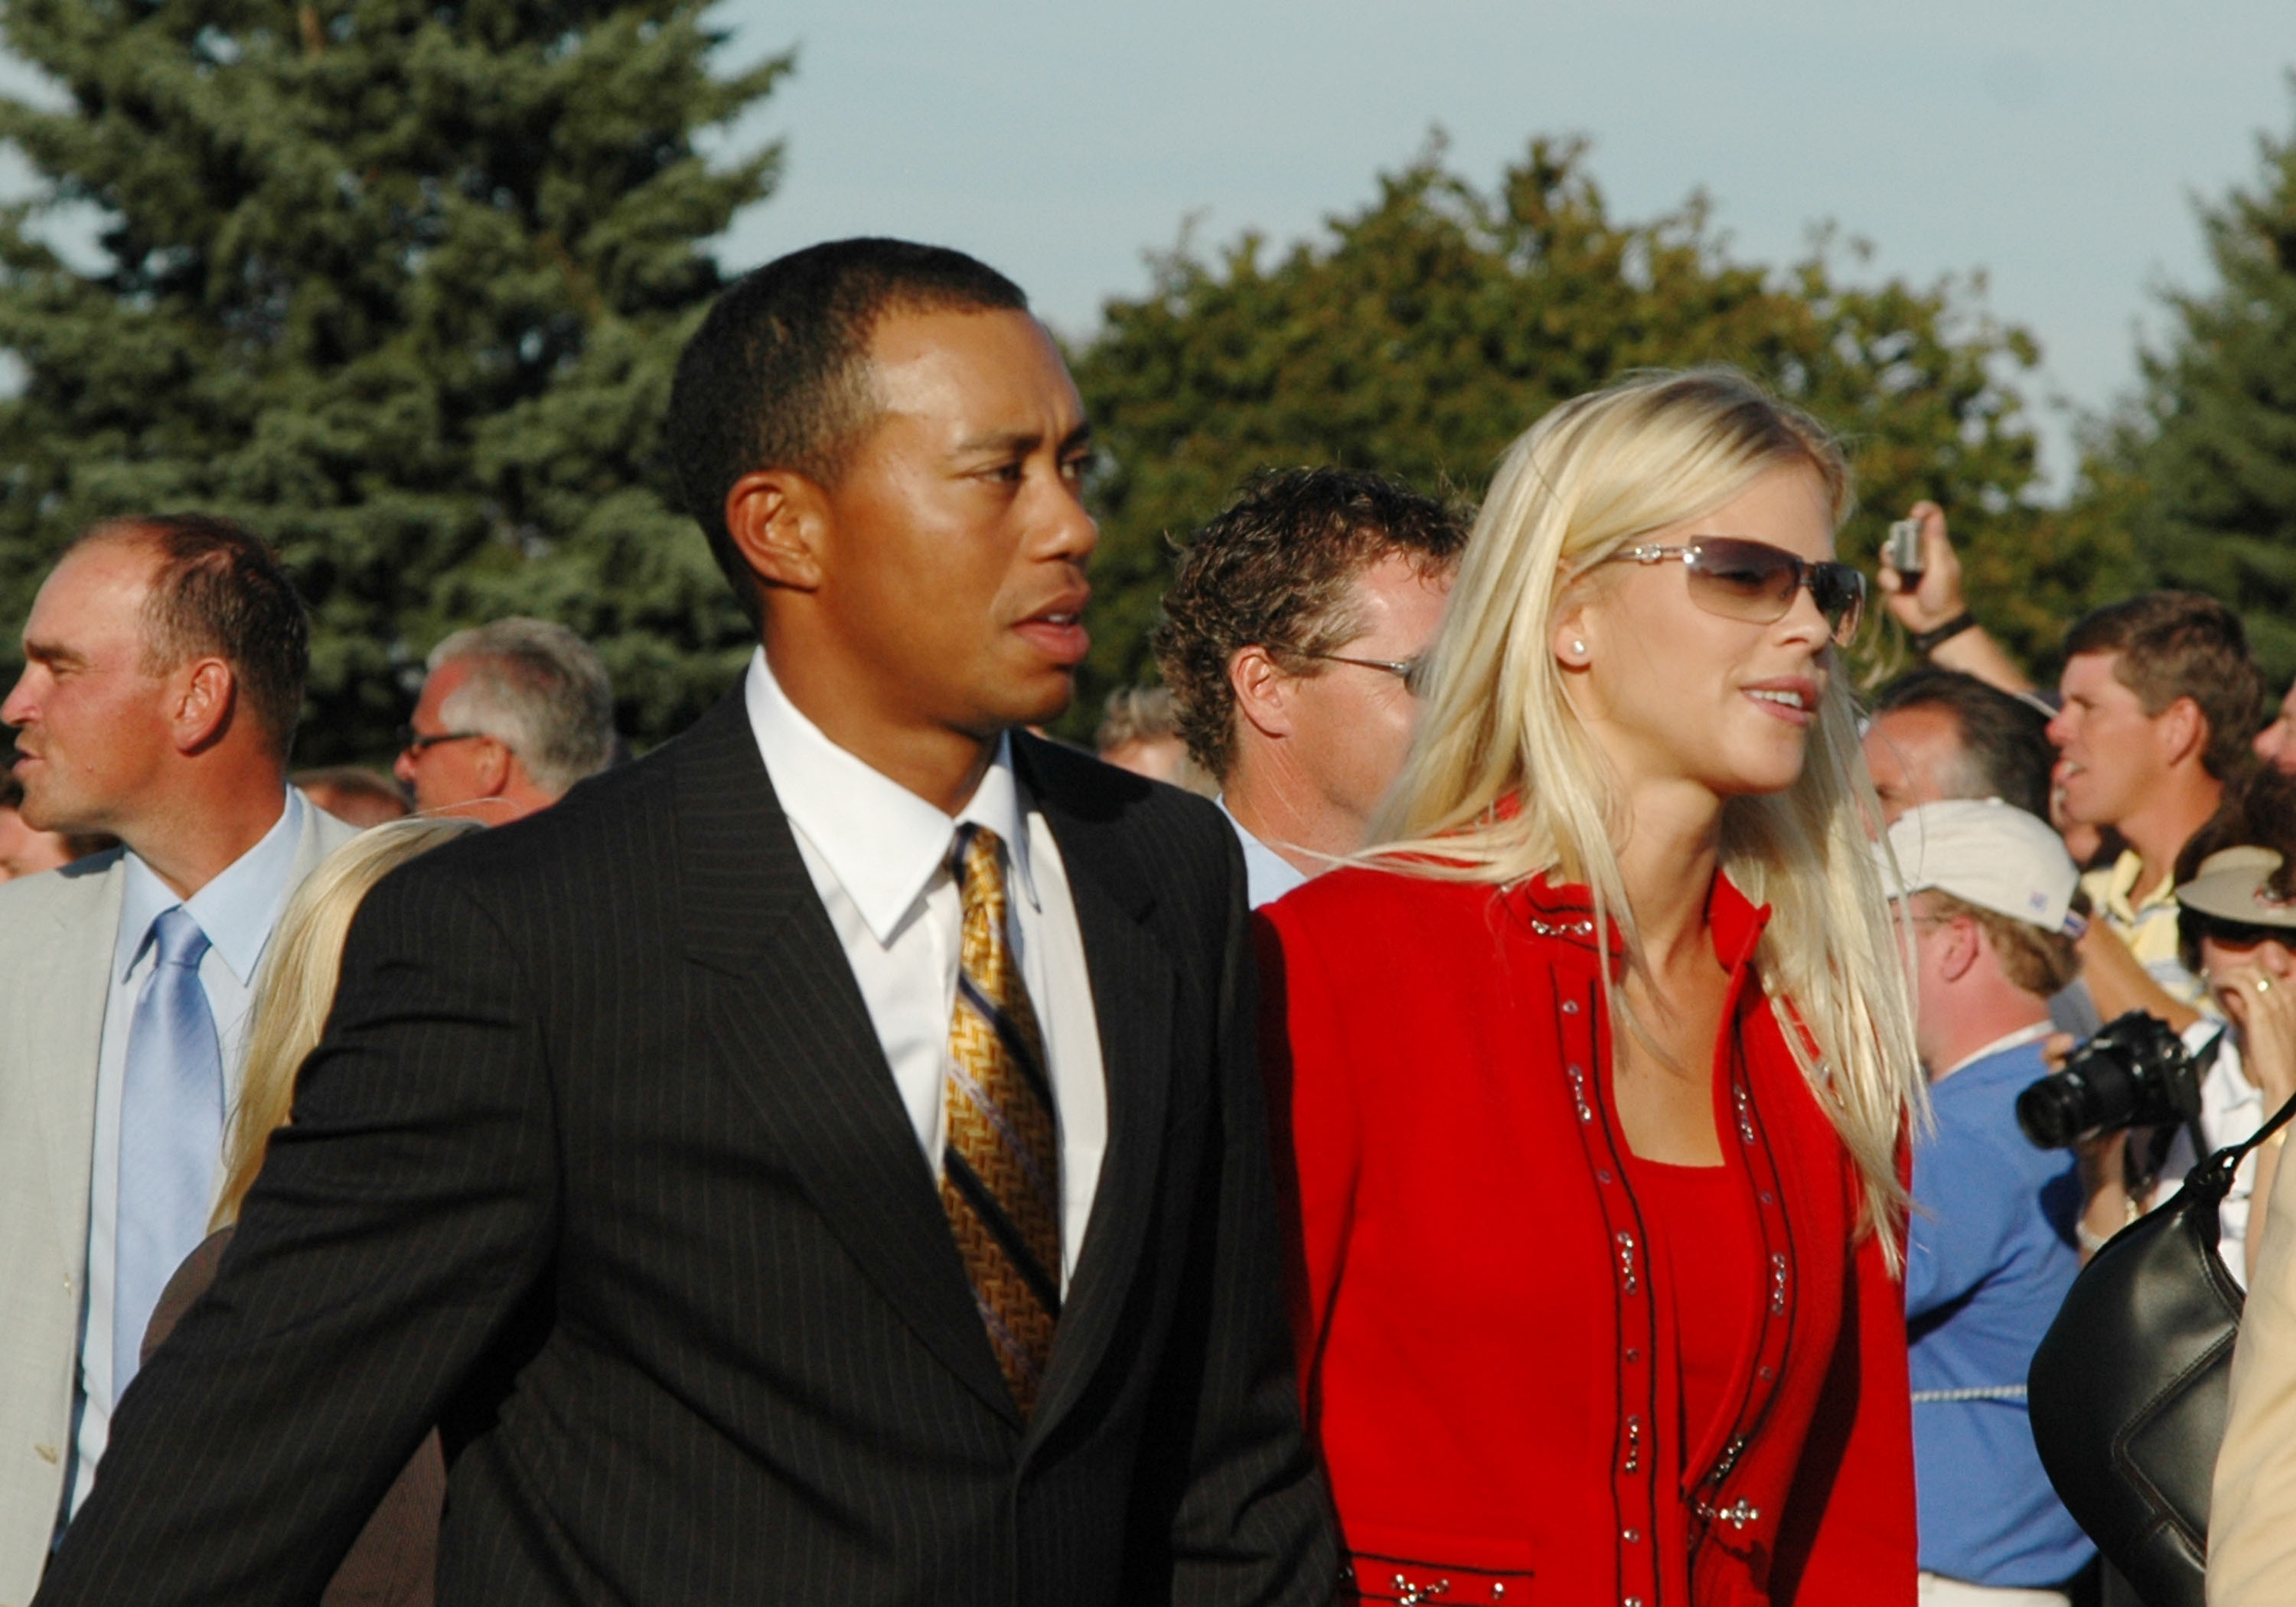 Tiger Woods and Elin Nordegren at the 2004 Ryder Cup in Detroit, Michigan, September 16, 2004. | Source: Getty Images